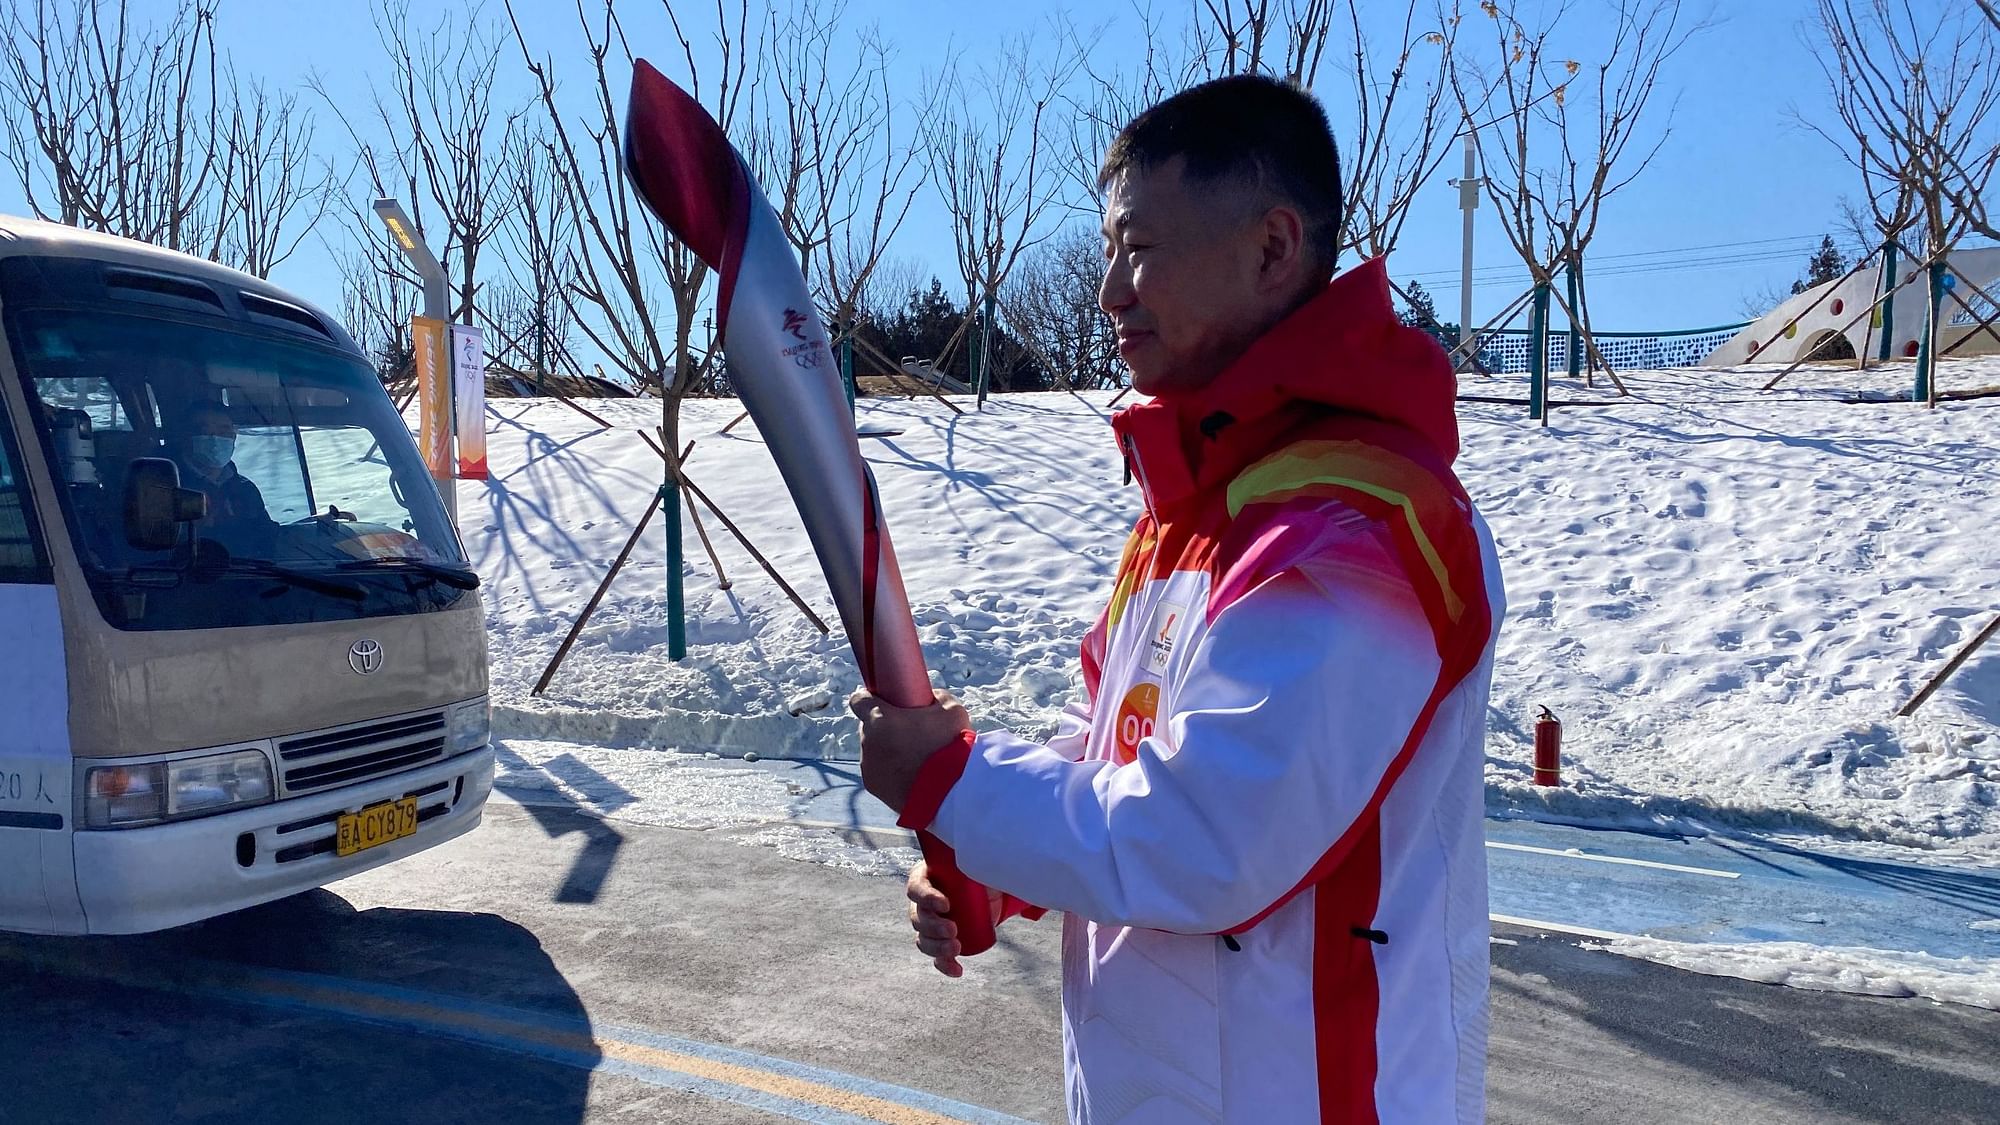 <div class="paragraphs"><p>Ahead of the 2022 Winter Olympics in Beijing, China on Wednesday, 2 February, shared that among the torchbearers of the Olympic flame was a soldier who had fought against India in the Galwan Valley in 2020.</p></div>